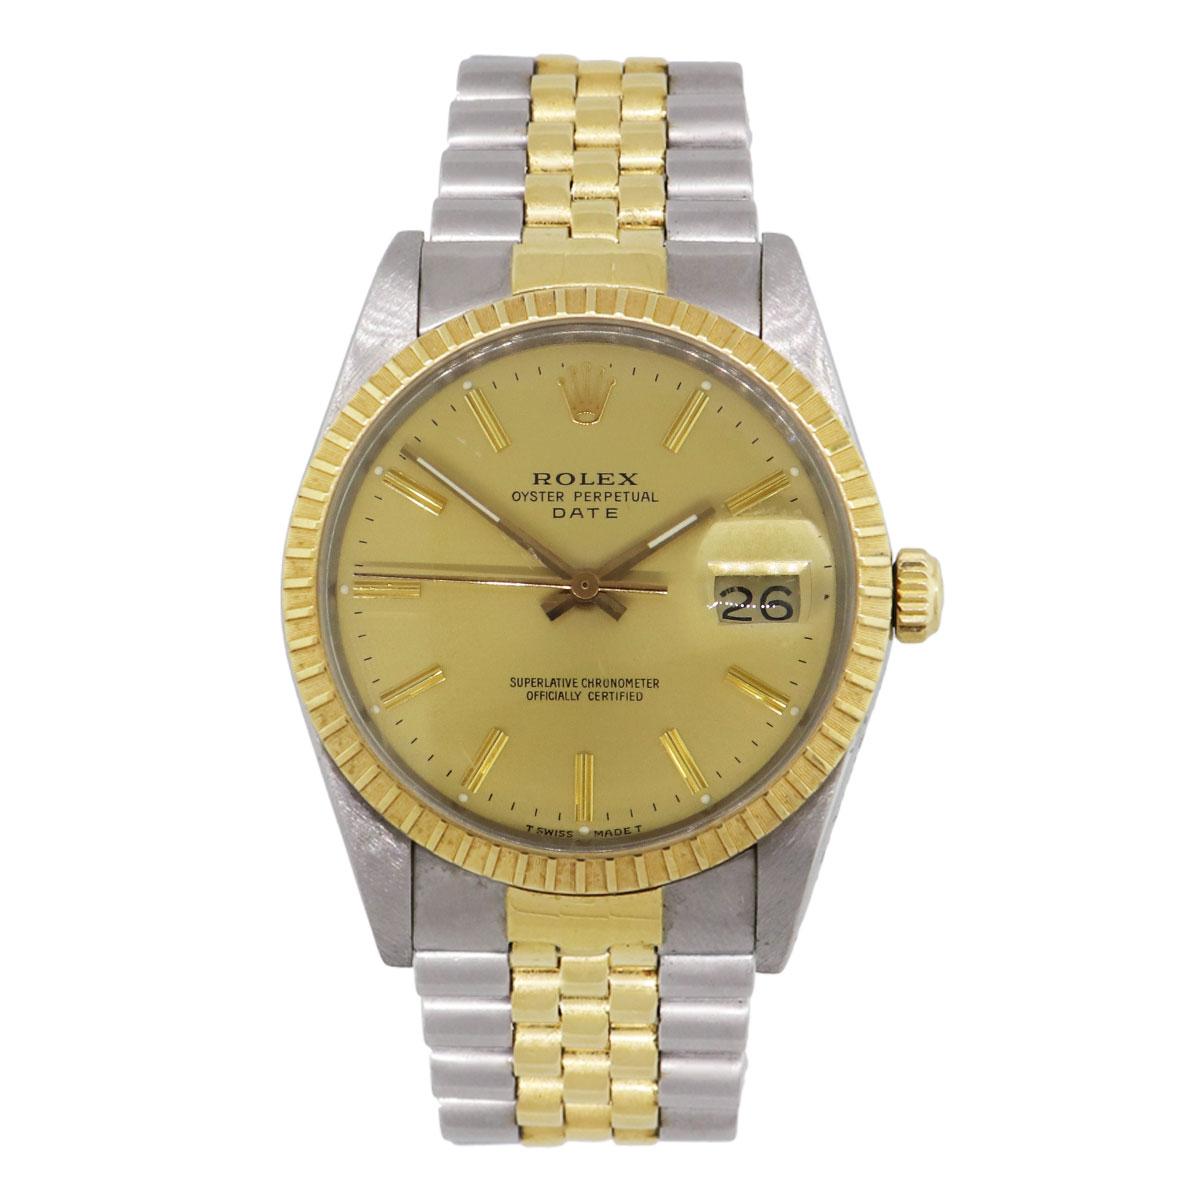 Brand: Rolex
MPN: 15053
Model: Date
Case Material: Stainless steel
Case Diameter: 34mm
Crystal: Plastic crystal
Bezel: 18k yellow gold engine turned bezel
Dial: Champagne stick dial
Bracelet: Stainless steel and 18k yellow gold band
Size: Will fit